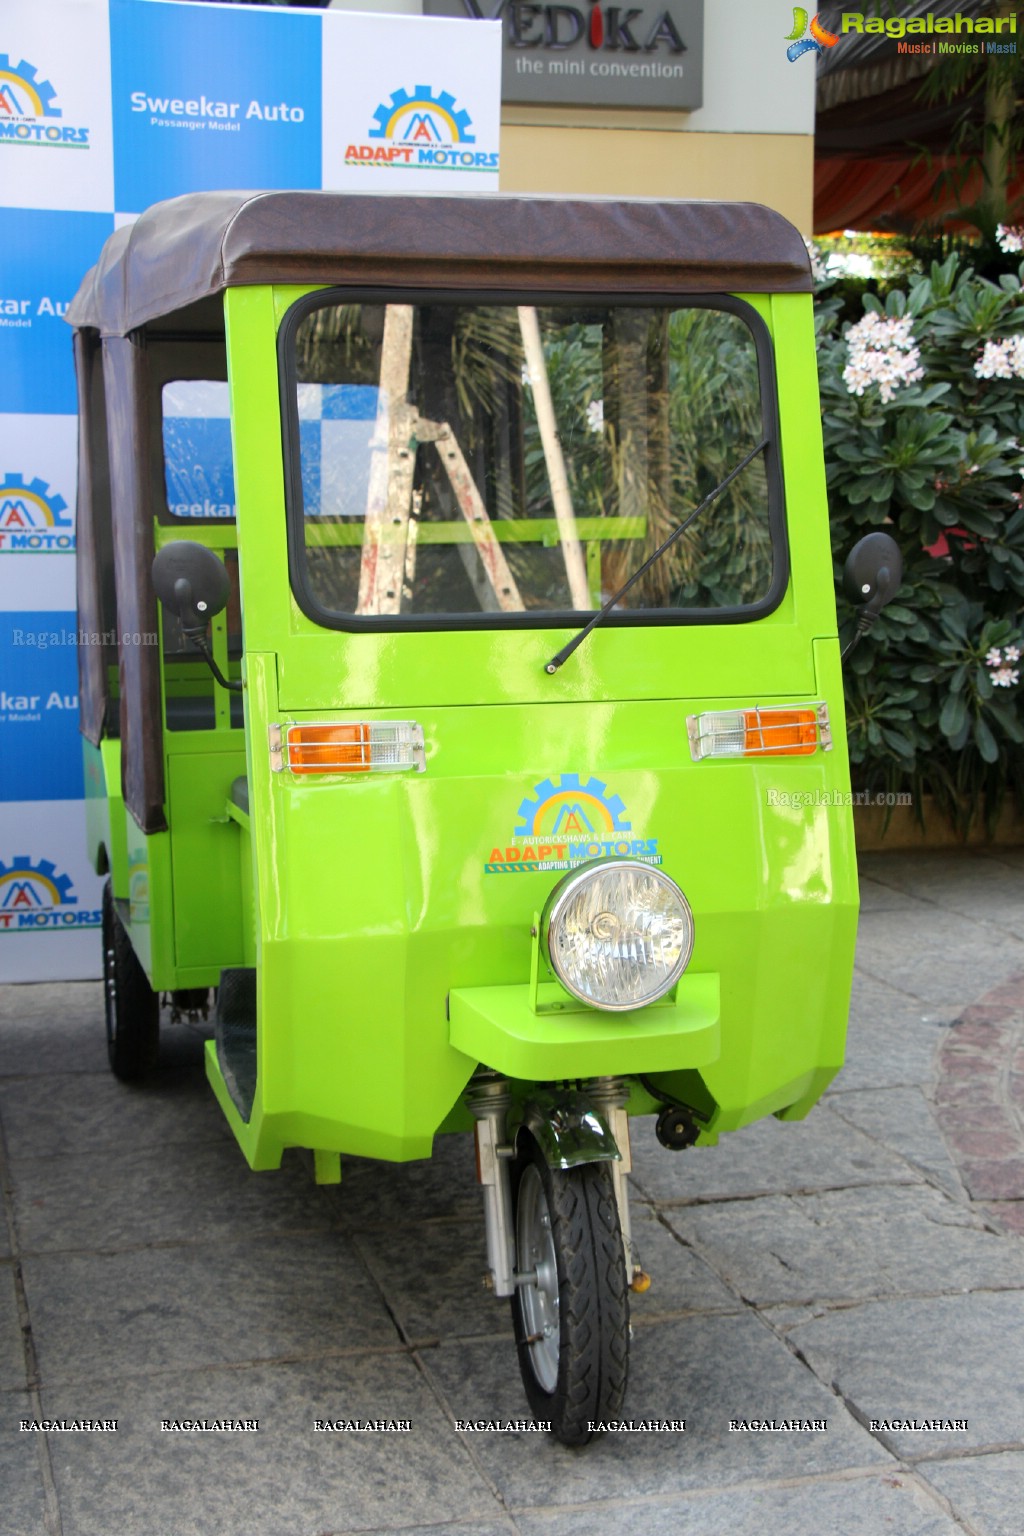 Innovative Three Wheelers Launch by Young Startup Adapt Motors at Vedika Hall, Necklace Road, Hyderabad